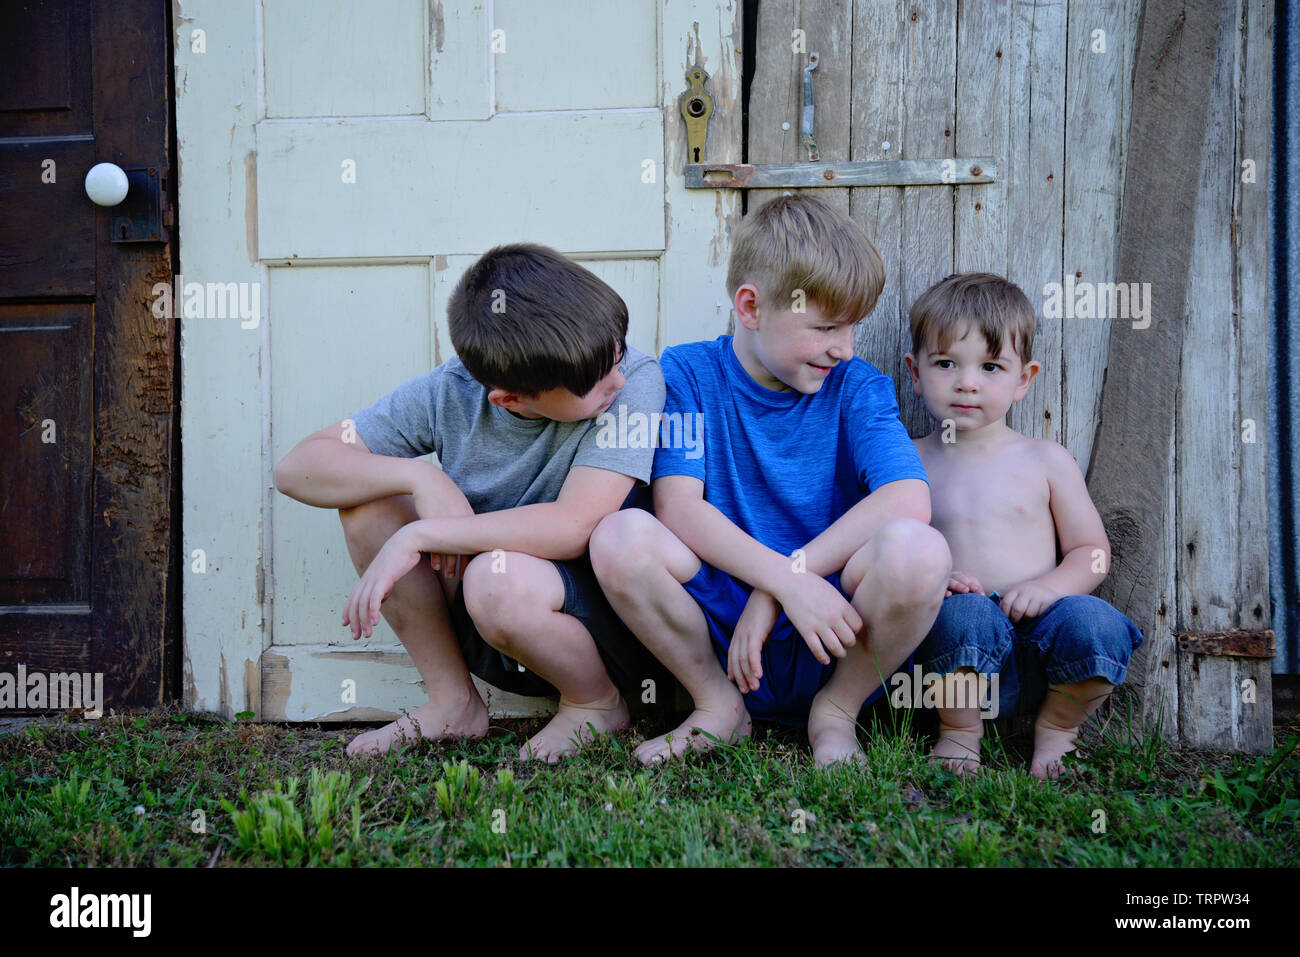 three boys sit by old wooden weathered doors Stock Photo